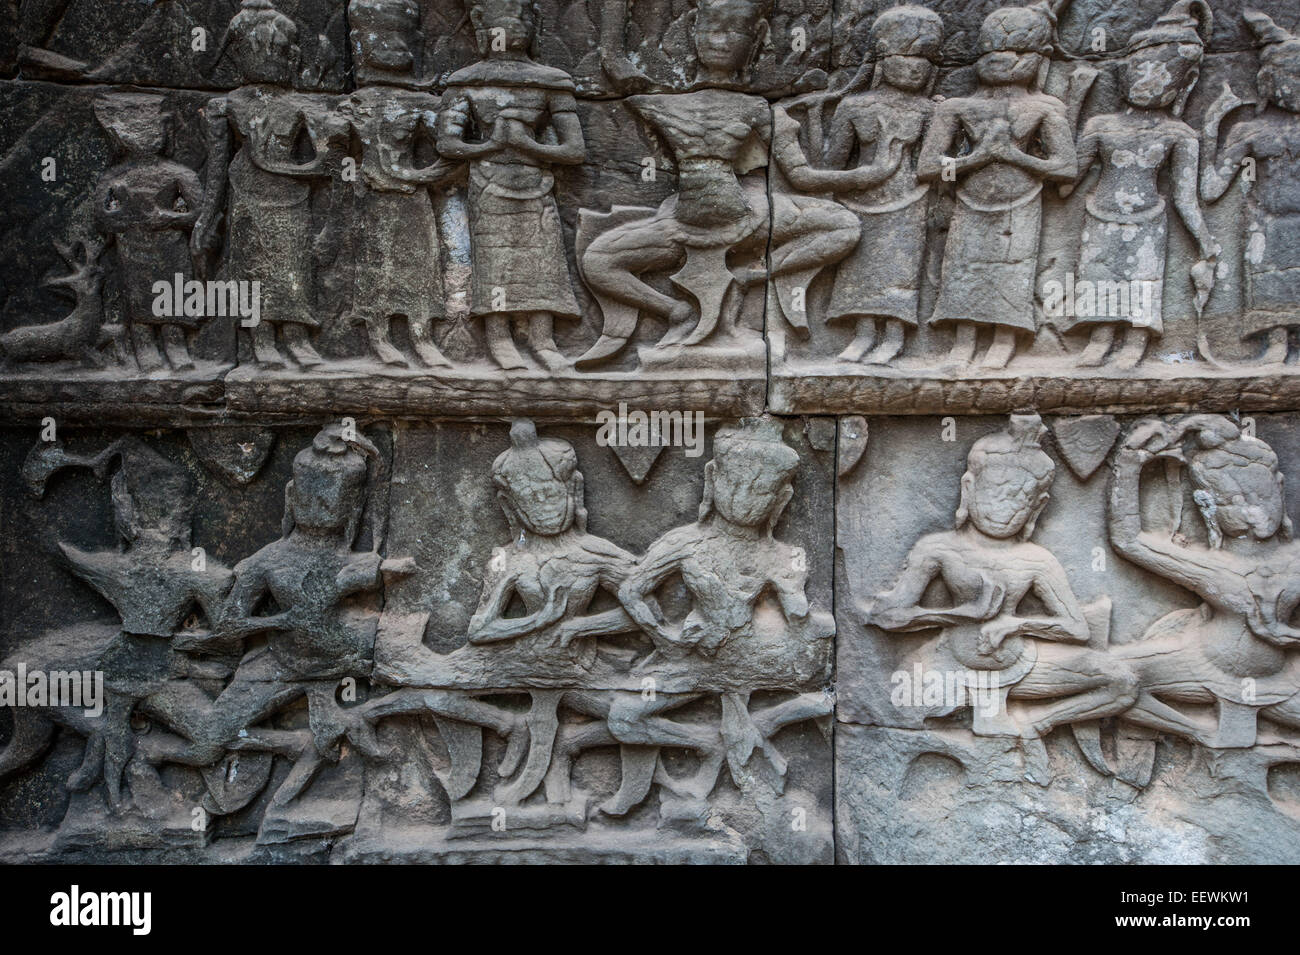 Relief carving on a stone wall at the ruined temple Ta Prohm at Angkor wat, Cambodia Stock Photo